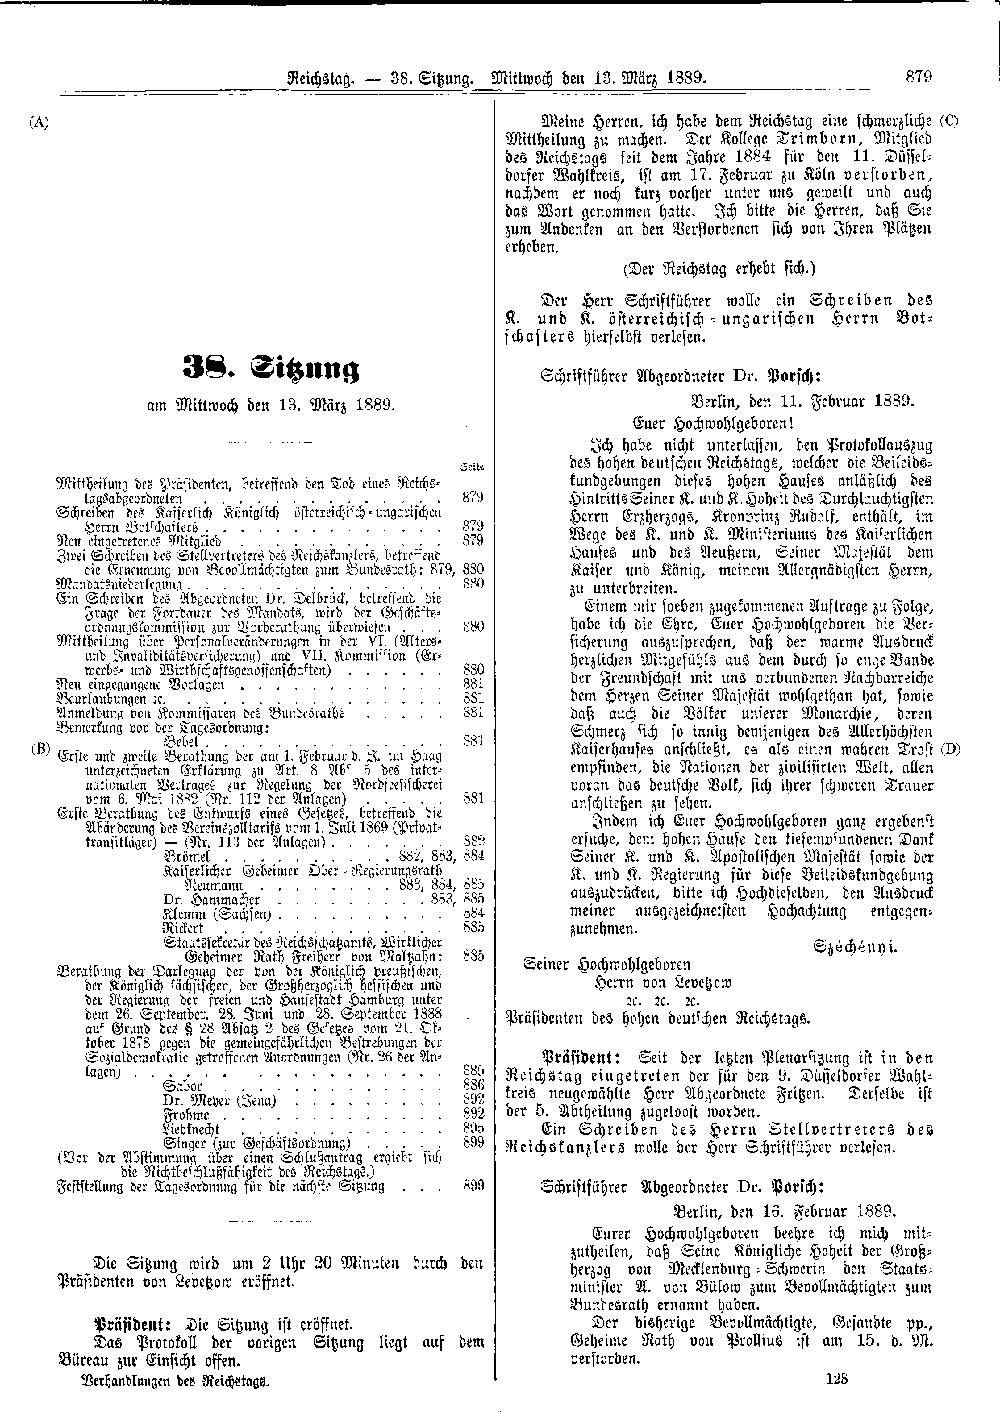 Scan of page 879